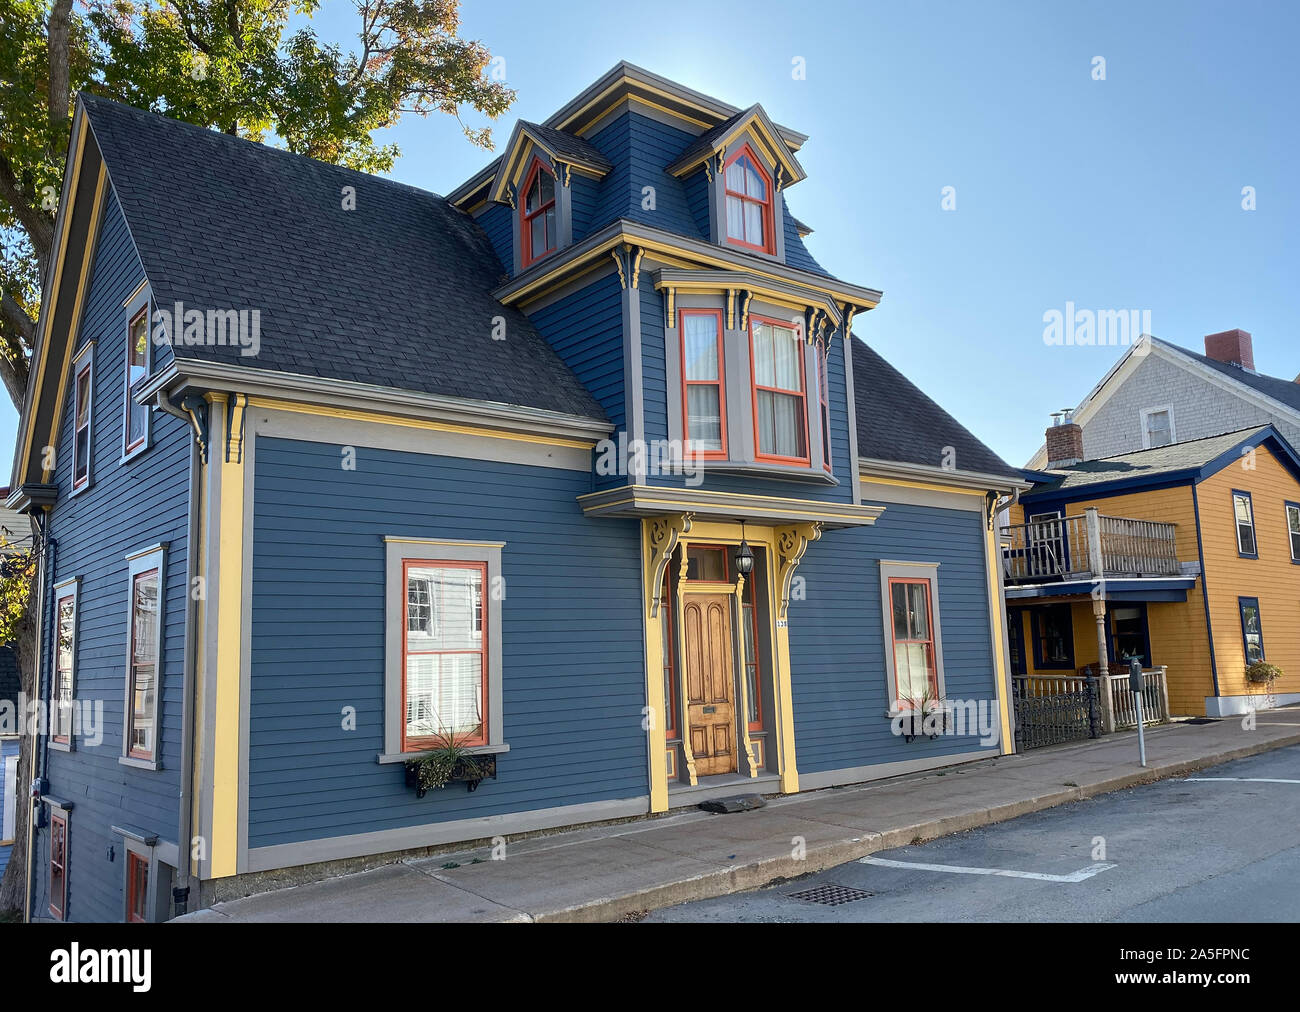 This photo of a house in the Nova Scotian town of Lunenburg dates to october 2019. Lunenburg is a port town on the South Shore of Nova Scotia, Canada. Founded in 1753, the town was one of the first British attempts to settle Protestants in Nova Scotia intended to displace Mi'kmaqs and Acadians. The architecture is unique: The mundane five-sided Scottish dormer is the central dormer and has, by hands of local craftsmen, been forever transformed into architectural legend, and it's only in Lunenburg. Lunenburg is a UNESCO World Heritage site. Stock Photo